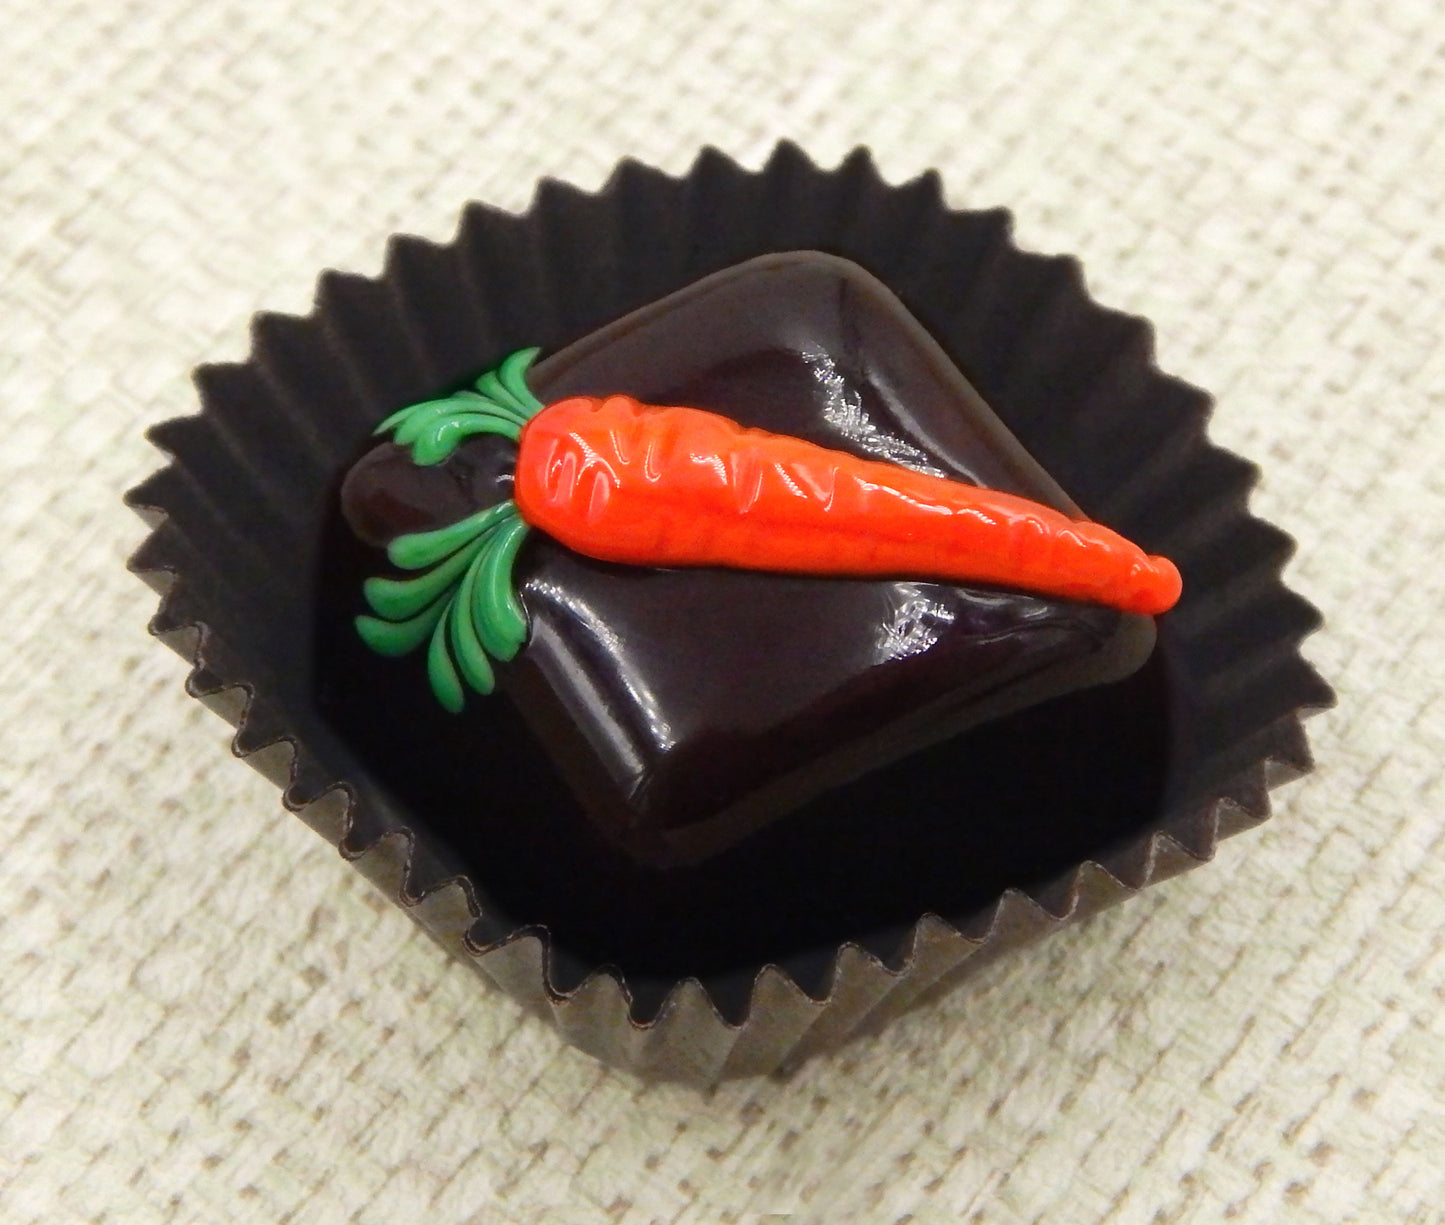 Chocolate with Carrot (23-032CO)